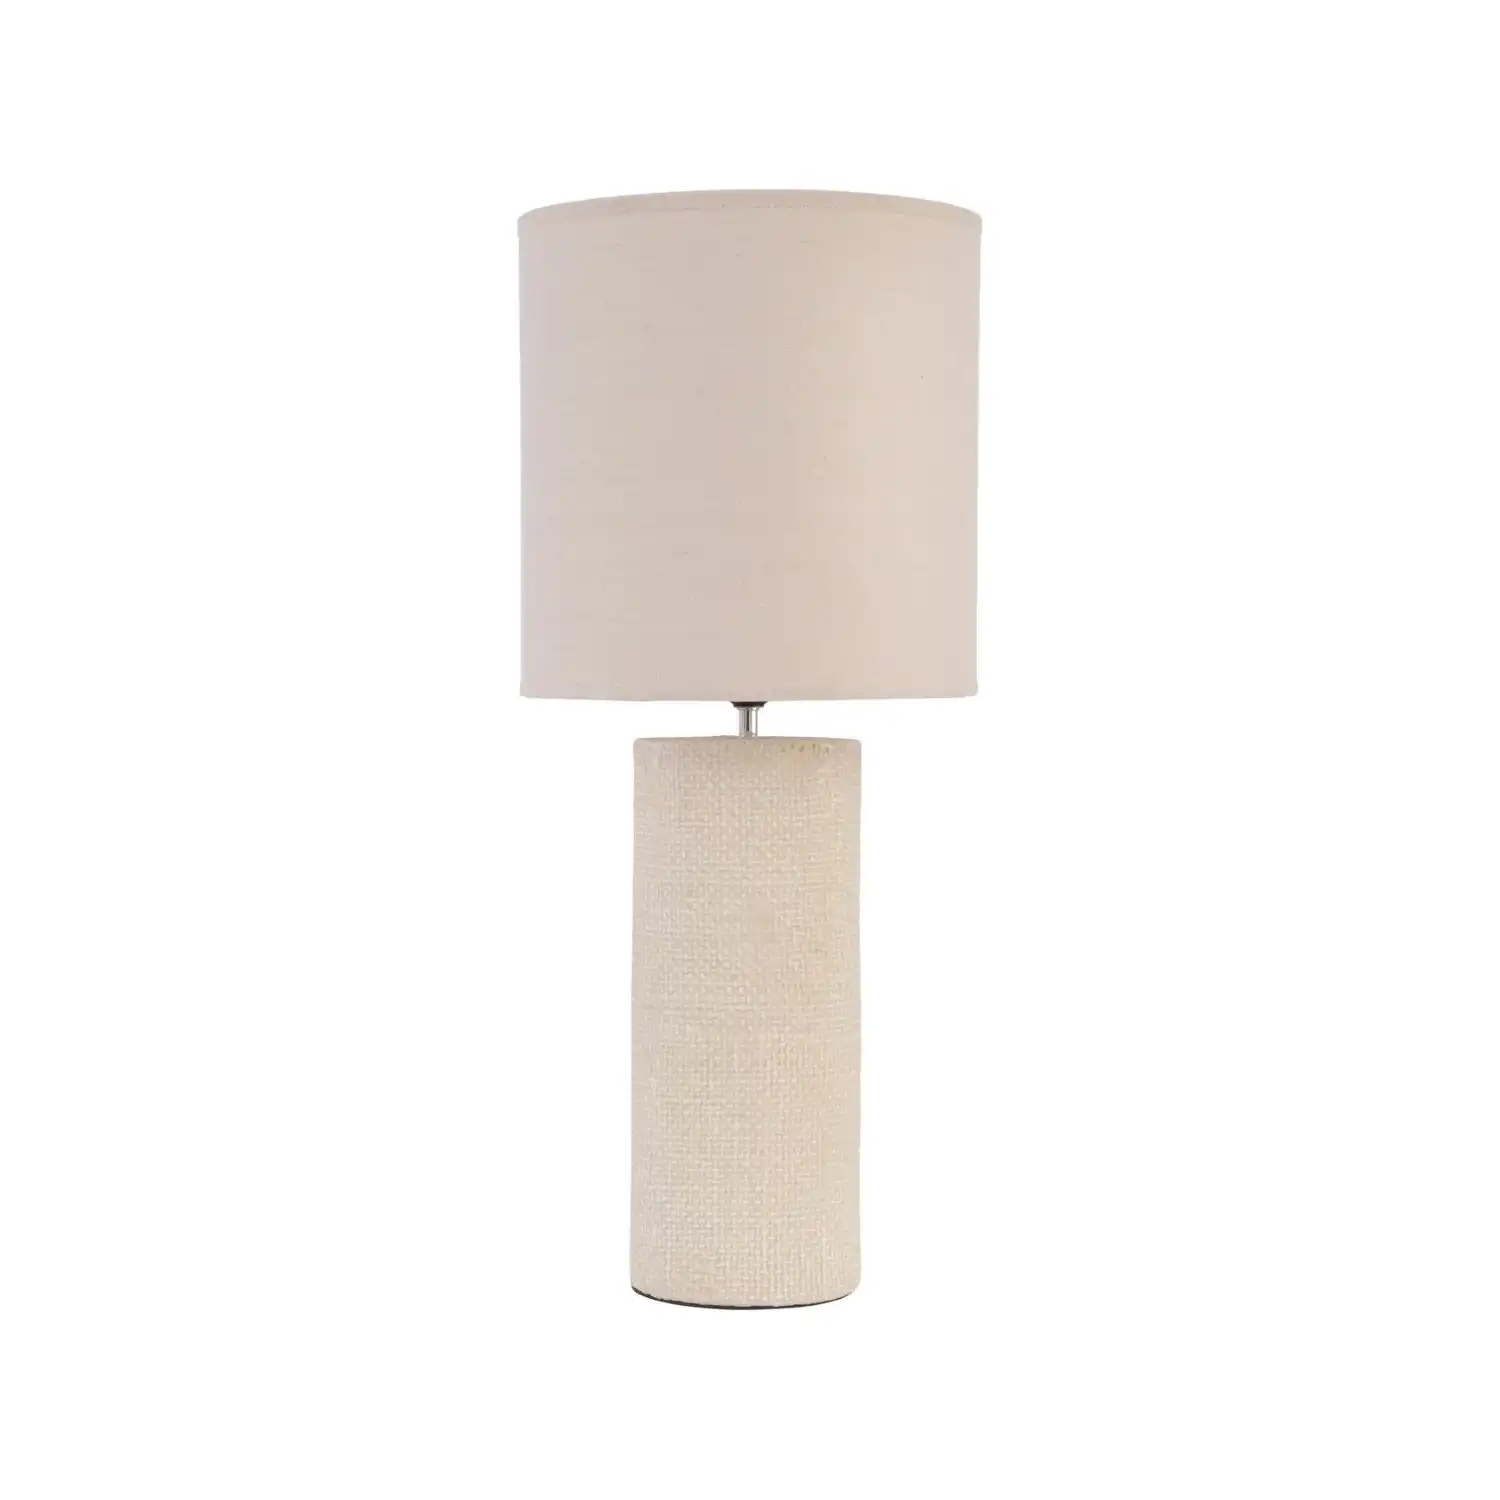 Tall Cream Porcelain Table Lamp with Cream Shade